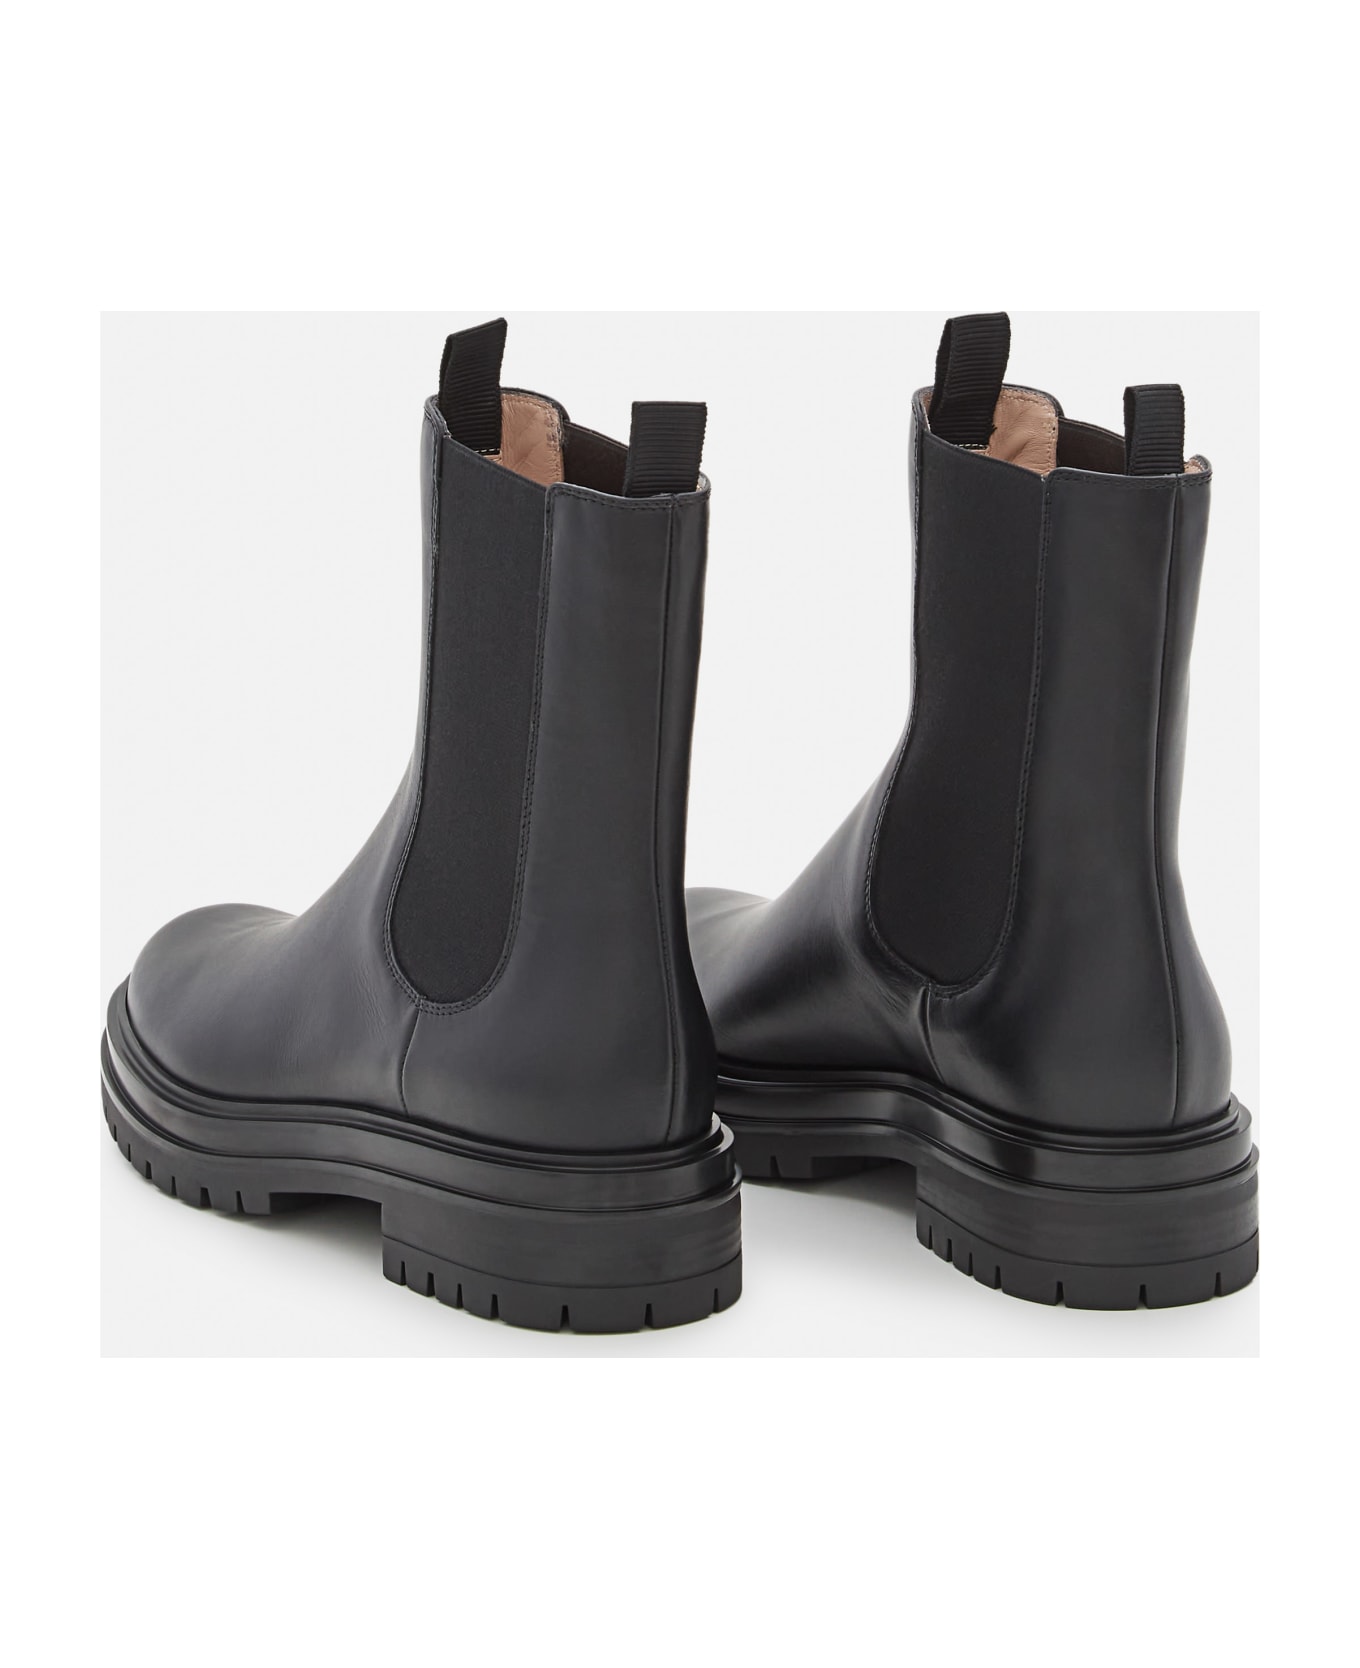 Gianvito Rossi Chester Leather Chelsea Boots - Black